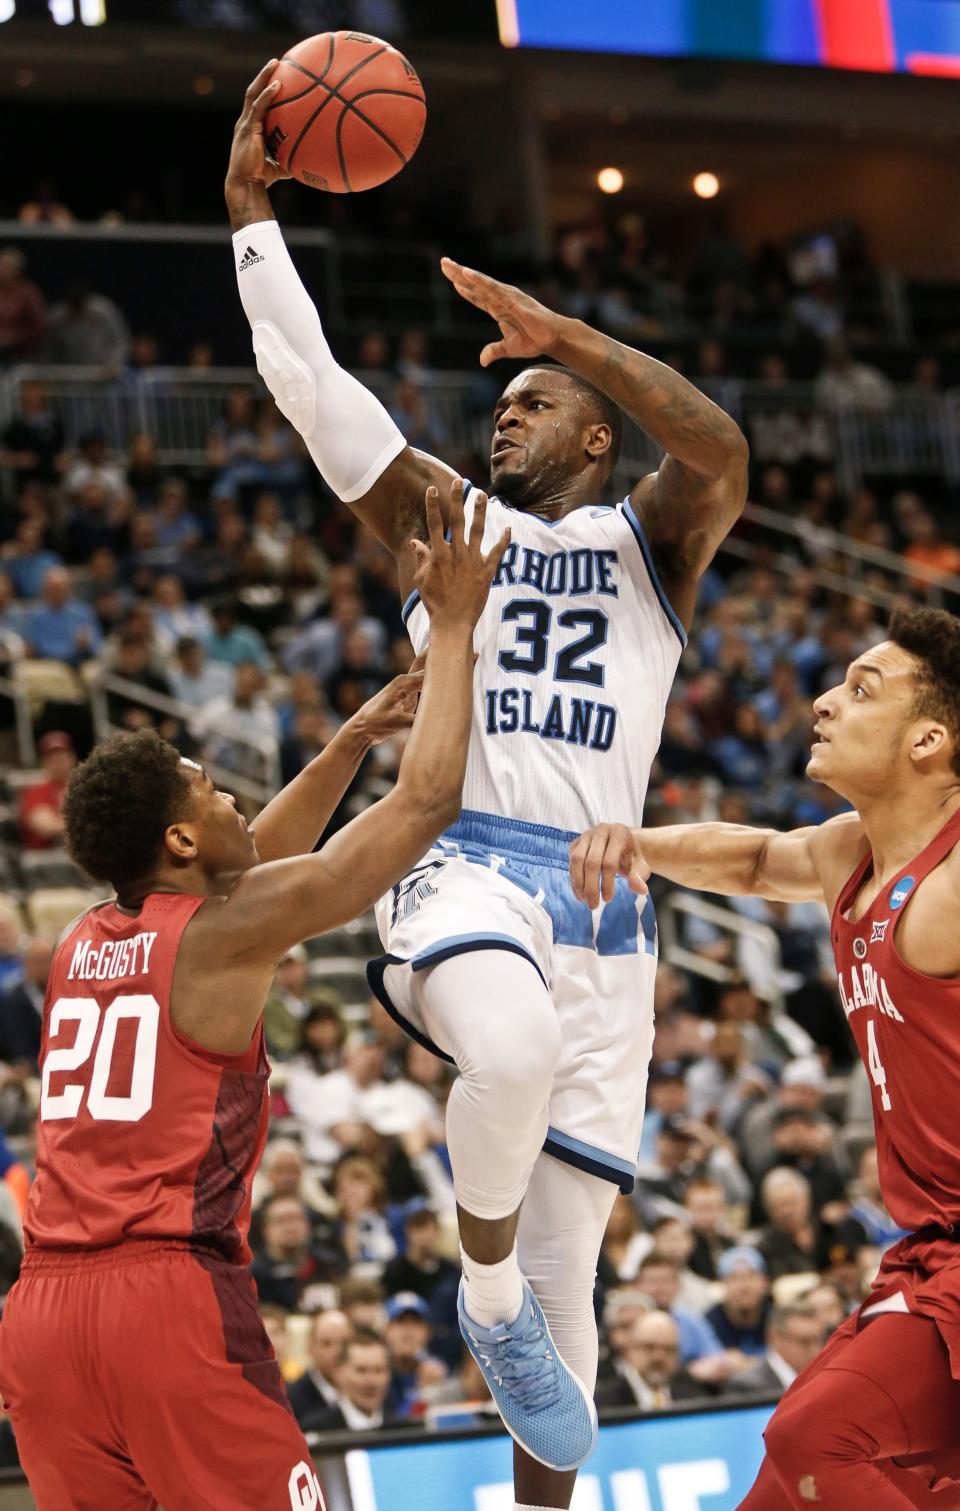 URI's Jared Terrell was one of the alumni players who had agreed to play for The Rhody Way.